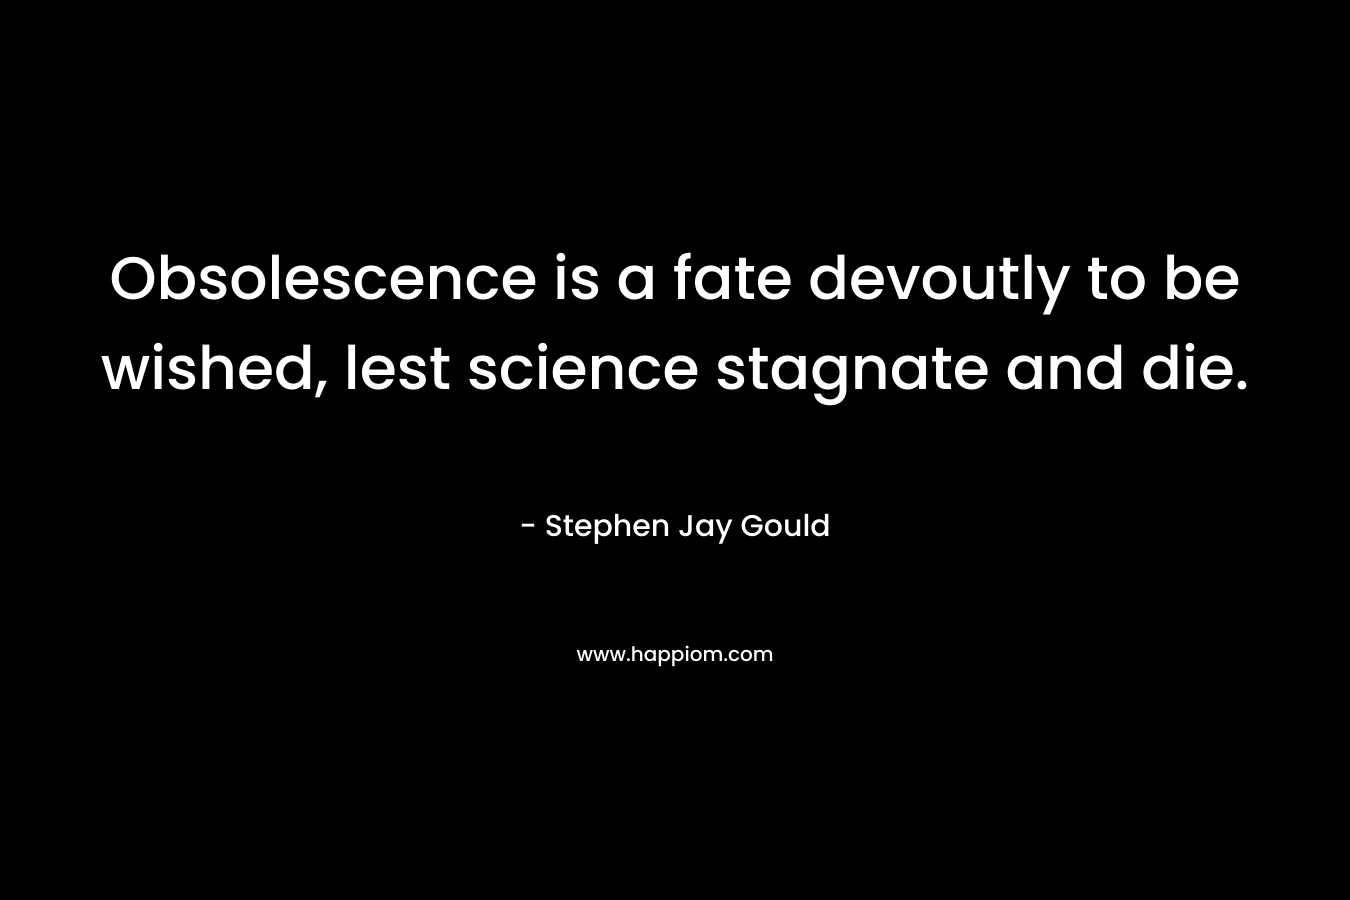 Obsolescence is a fate devoutly to be wished, lest science stagnate and die. – Stephen Jay Gould